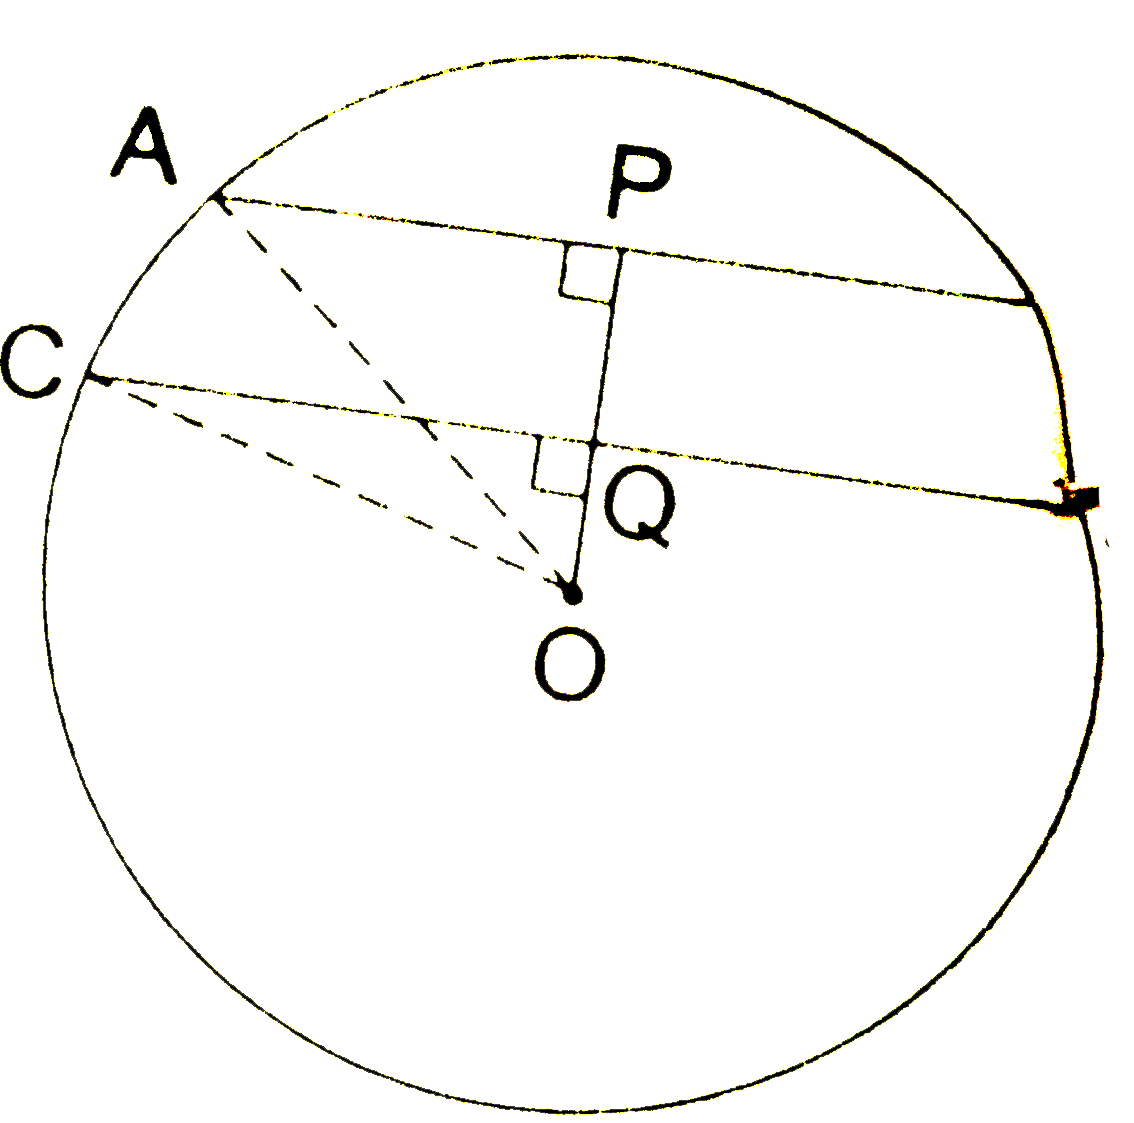 In the given figure, AB and CD are two parallel chords of a circle wit